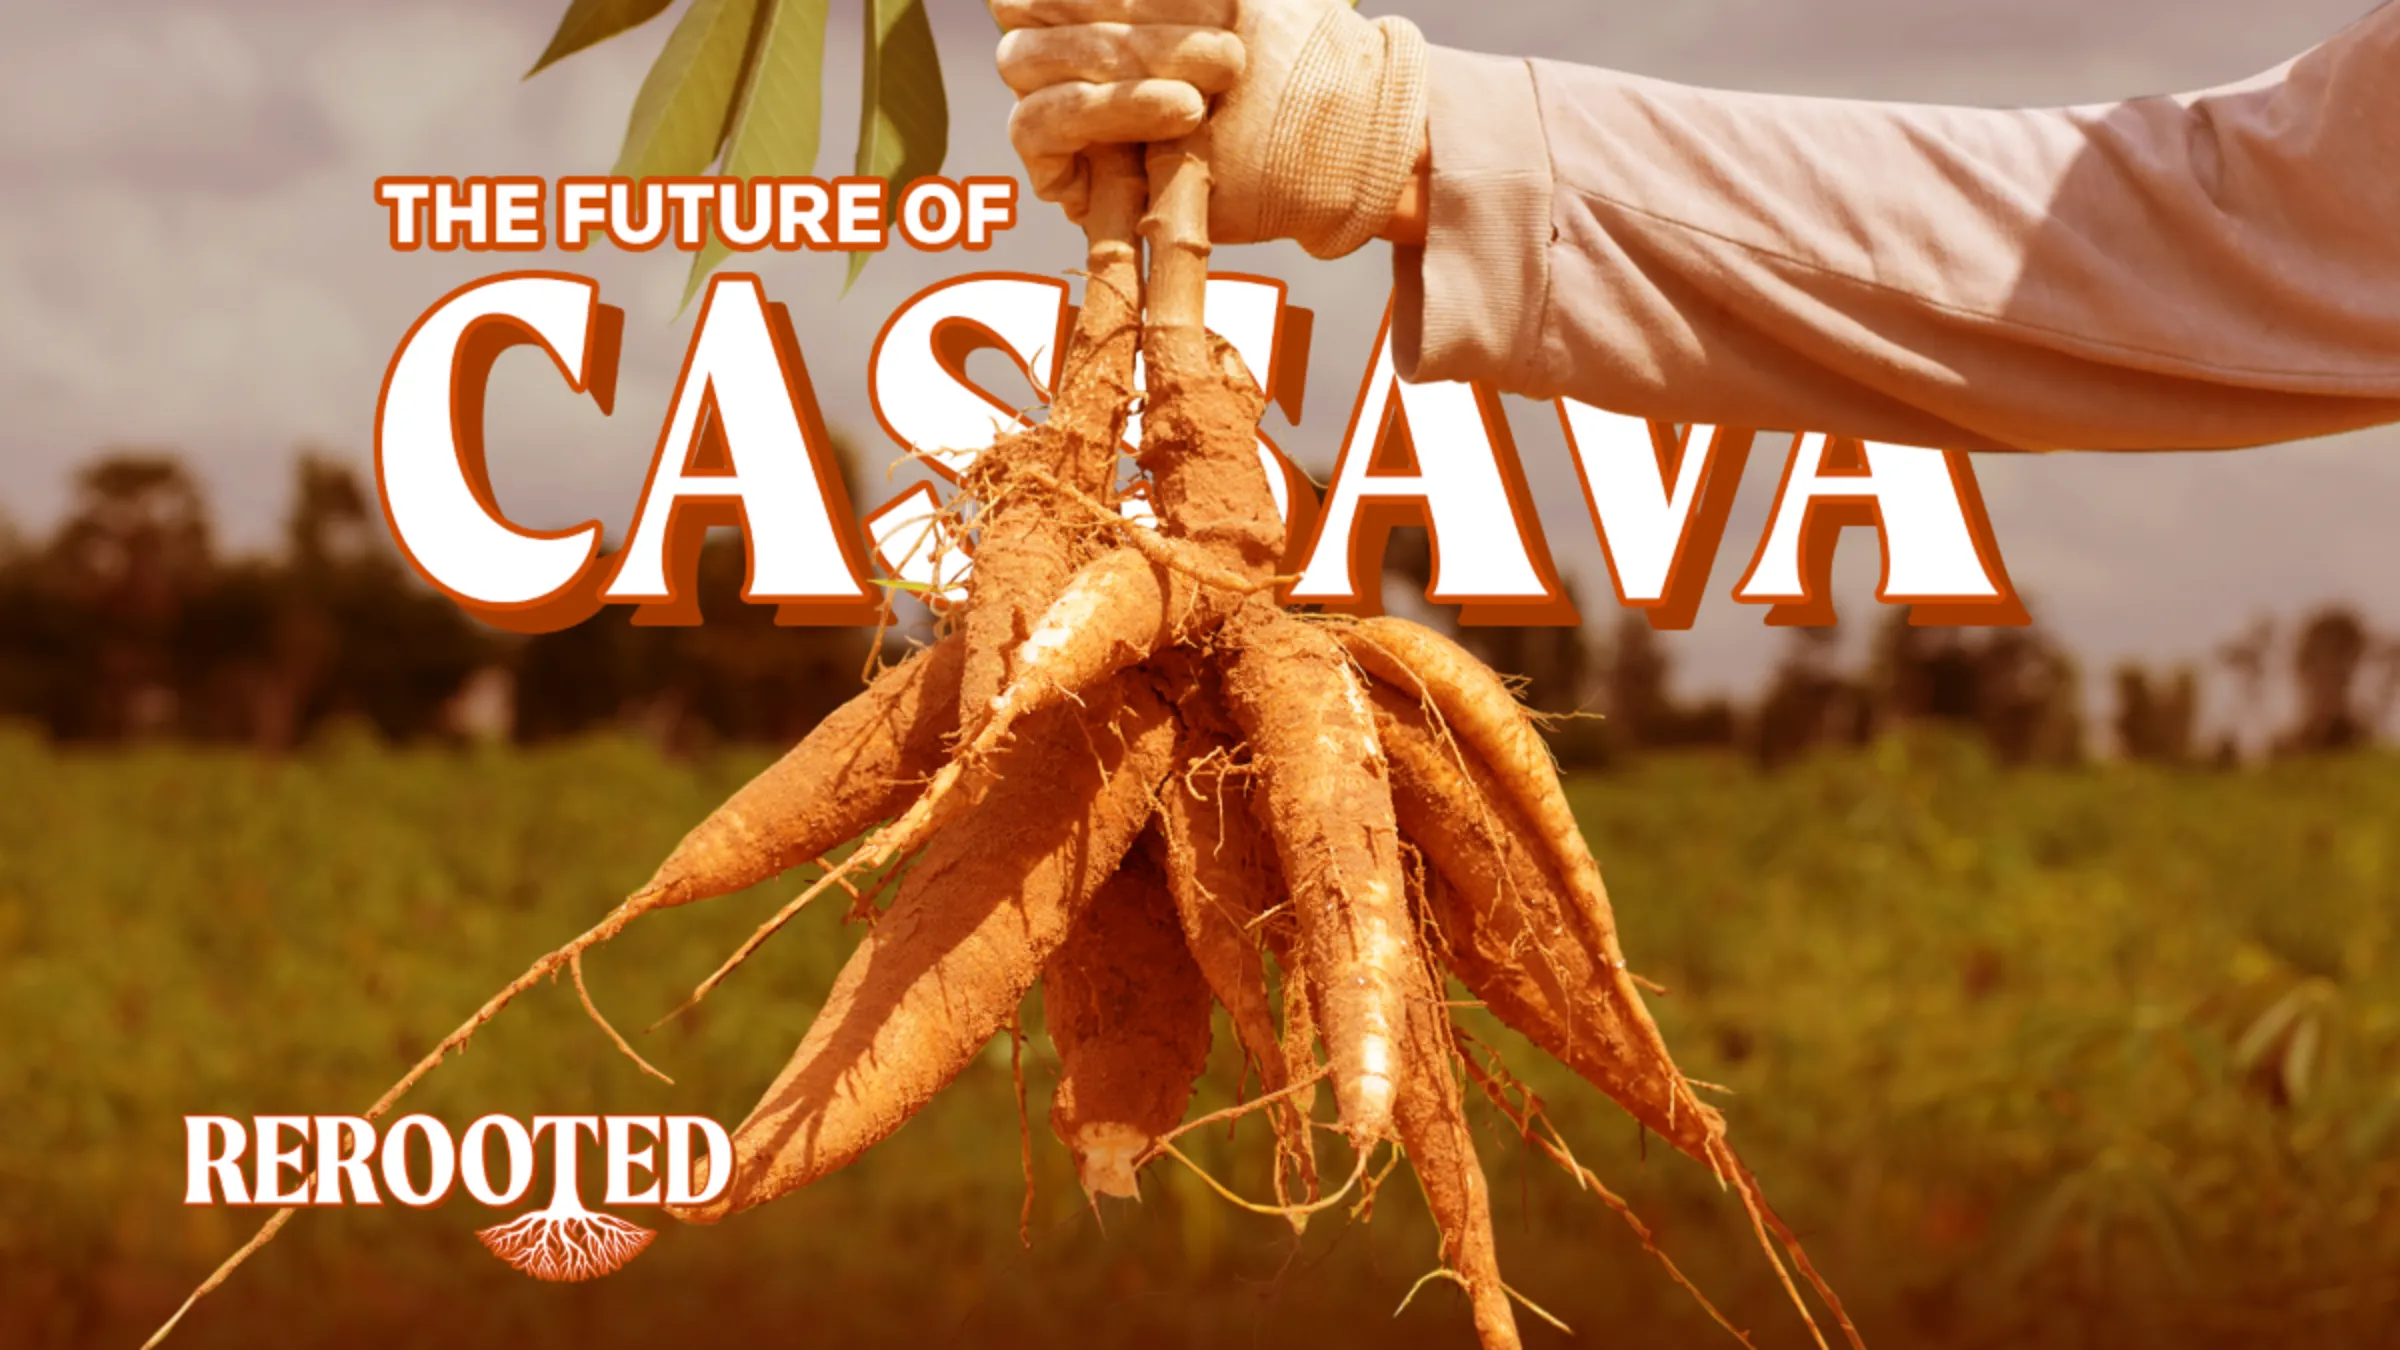 A farmer holds a cassava plant over the text 'THE FUTURE OF CASSAVA' with the text 'Context REROOTED' in the bottom left hand corner in this illustration picture. Thomson Reuters Foundation/Karif Wat